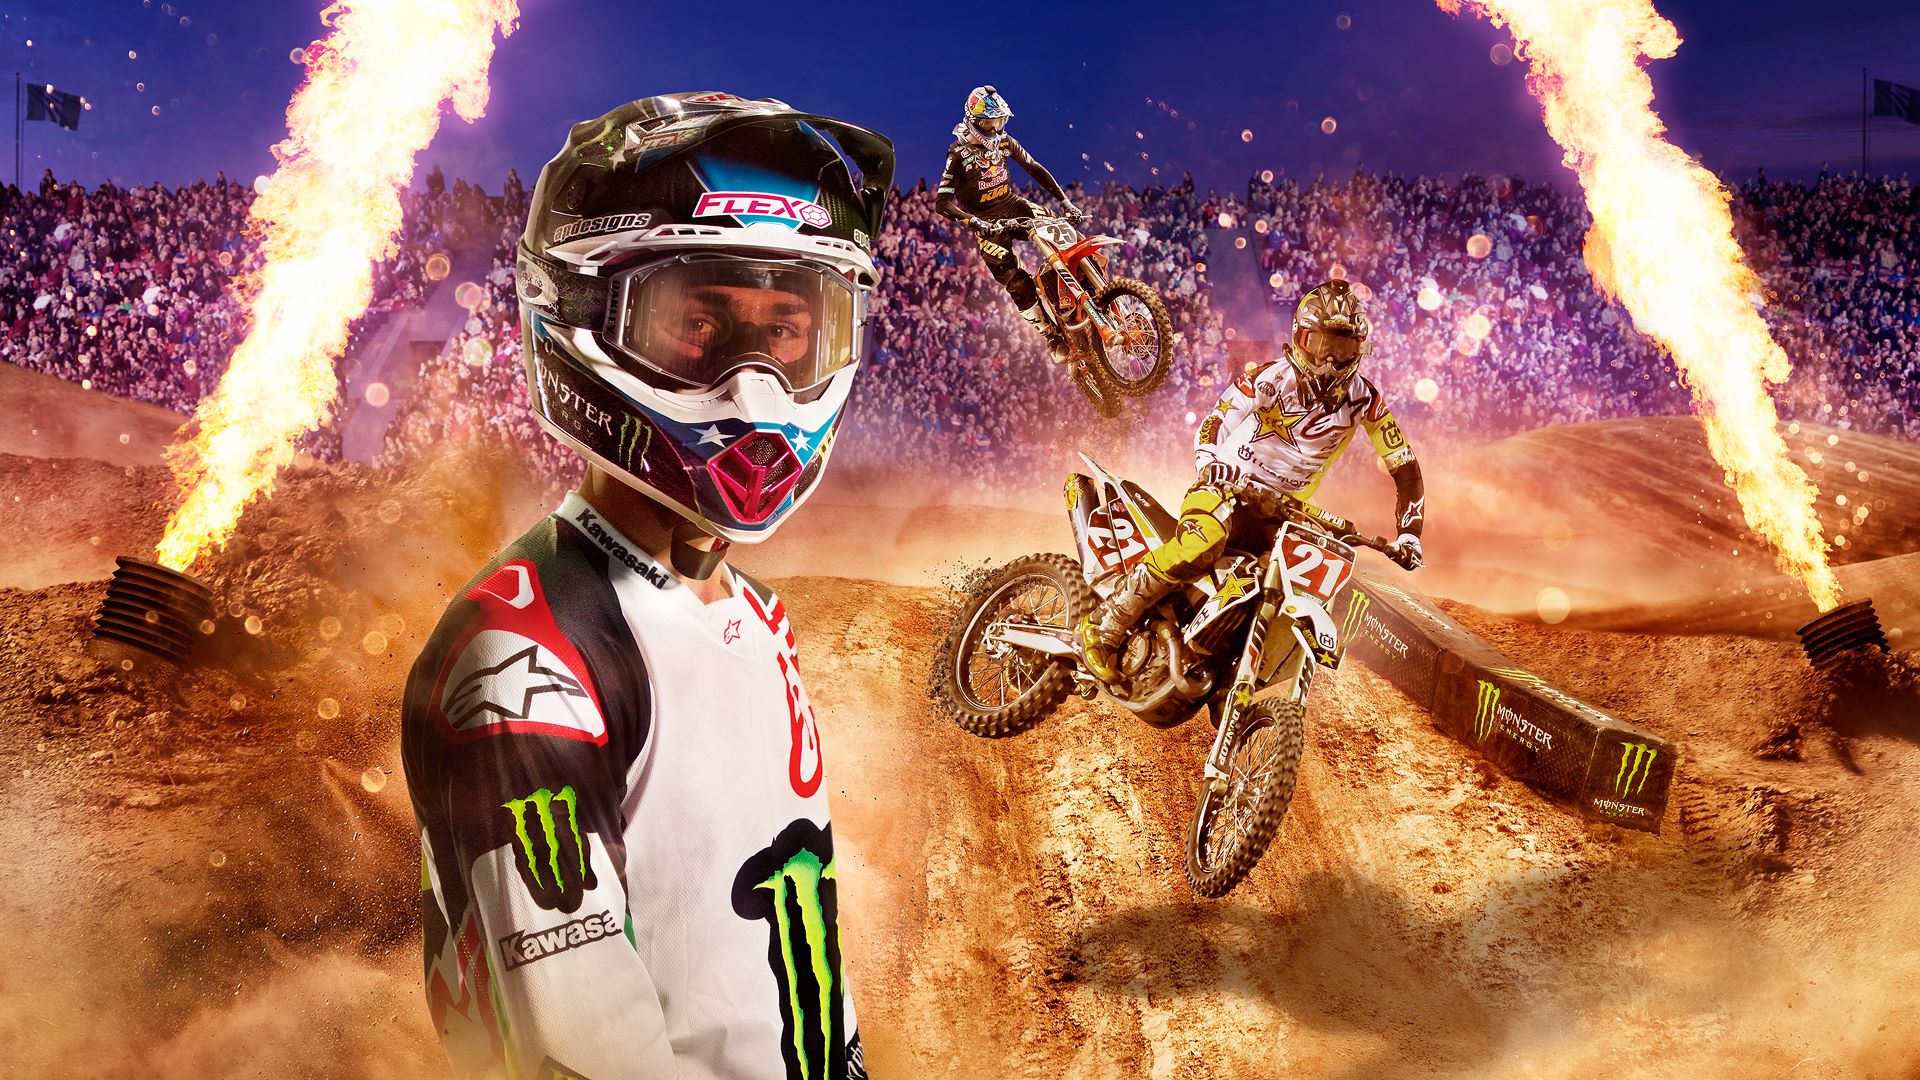 Monster Energy Supercross 2 - The Official Videogame